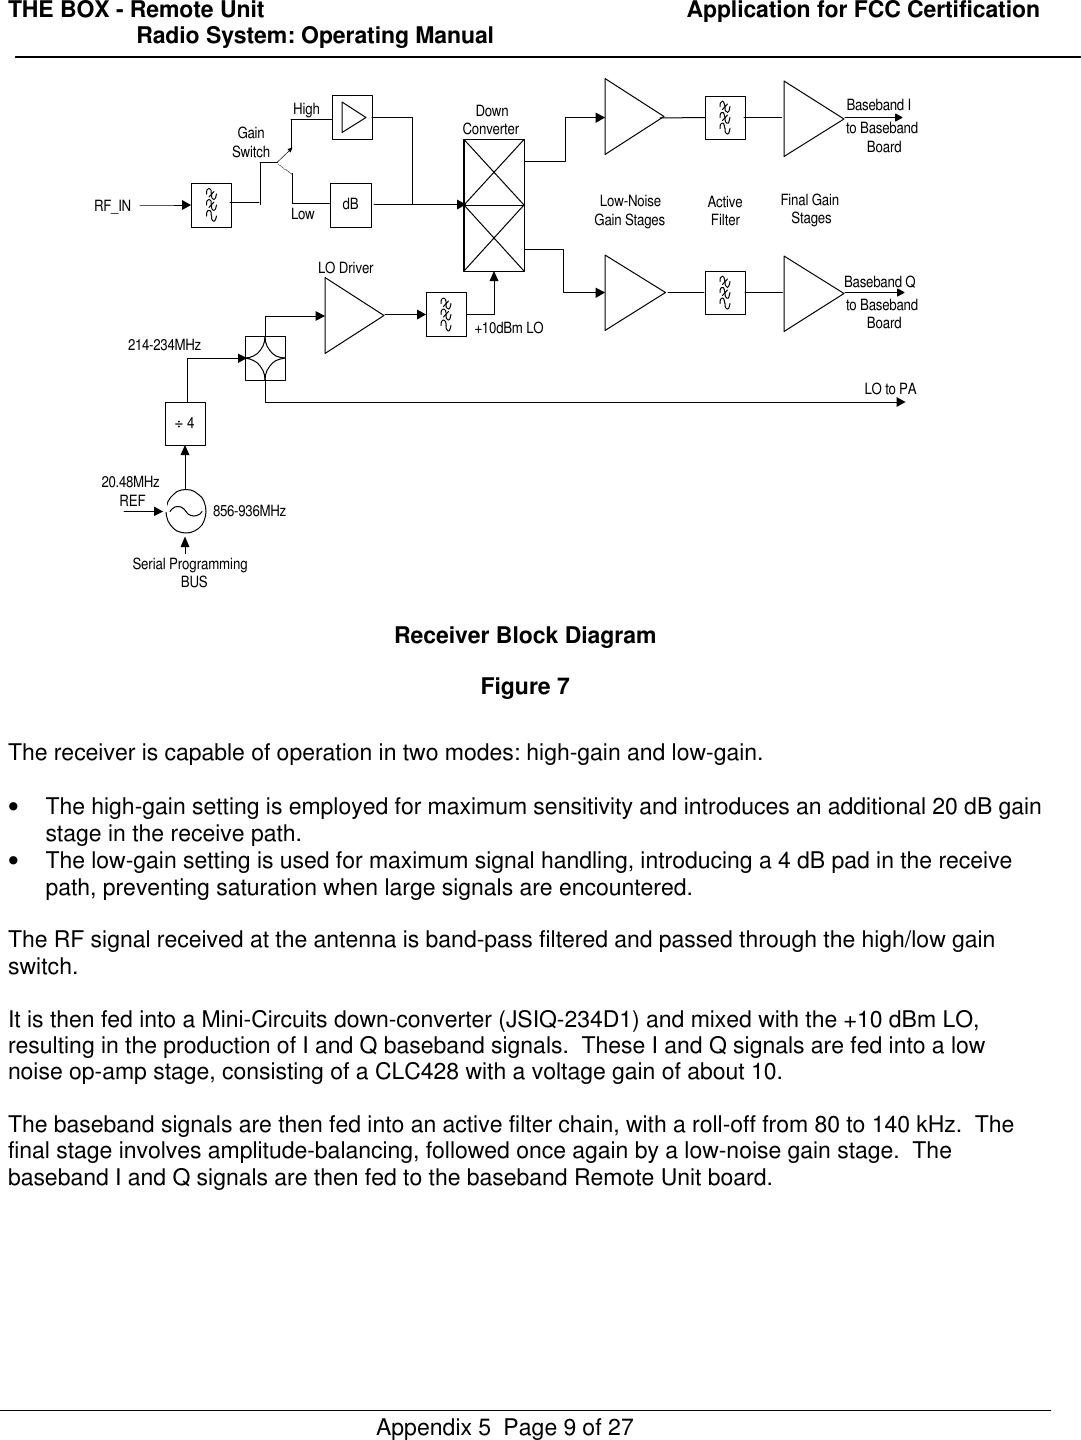 THE BOX - Remote Unit                                                                  Application for FCC Certification                    Radio System: Operating ManualAppendix 5  Page 9 of 27Baseband Ito BasebandBoardBaseband Qto BasebandBoardDownConverterLow-NoiseGain StagesRF_INLO Driver   LO to PA+ + 420.48MHzREF+10dBm LO856-936MHz214-234MHzSerial ProgrammingBUSActiveFilterFinal GainStagesdBGainSwitchHighLowReceiver Block DiagramFigure 7The receiver is capable of operation in two modes: high-gain and low-gain.• The high-gain setting is employed for maximum sensitivity and introduces an additional 20 dB gainstage in the receive path.• The low-gain setting is used for maximum signal handling, introducing a 4 dB pad in the receivepath, preventing saturation when large signals are encountered.The RF signal received at the antenna is band-pass filtered and passed through the high/low gainswitch.It is then fed into a Mini-Circuits down-converter (JSIQ-234D1) and mixed with the +10 dBm LO,resulting in the production of I and Q baseband signals.  These I and Q signals are fed into a lownoise op-amp stage, consisting of a CLC428 with a voltage gain of about 10.The baseband signals are then fed into an active filter chain, with a roll-off from 80 to 140 kHz.  Thefinal stage involves amplitude-balancing, followed once again by a low-noise gain stage.  Thebaseband I and Q signals are then fed to the baseband Remote Unit board.